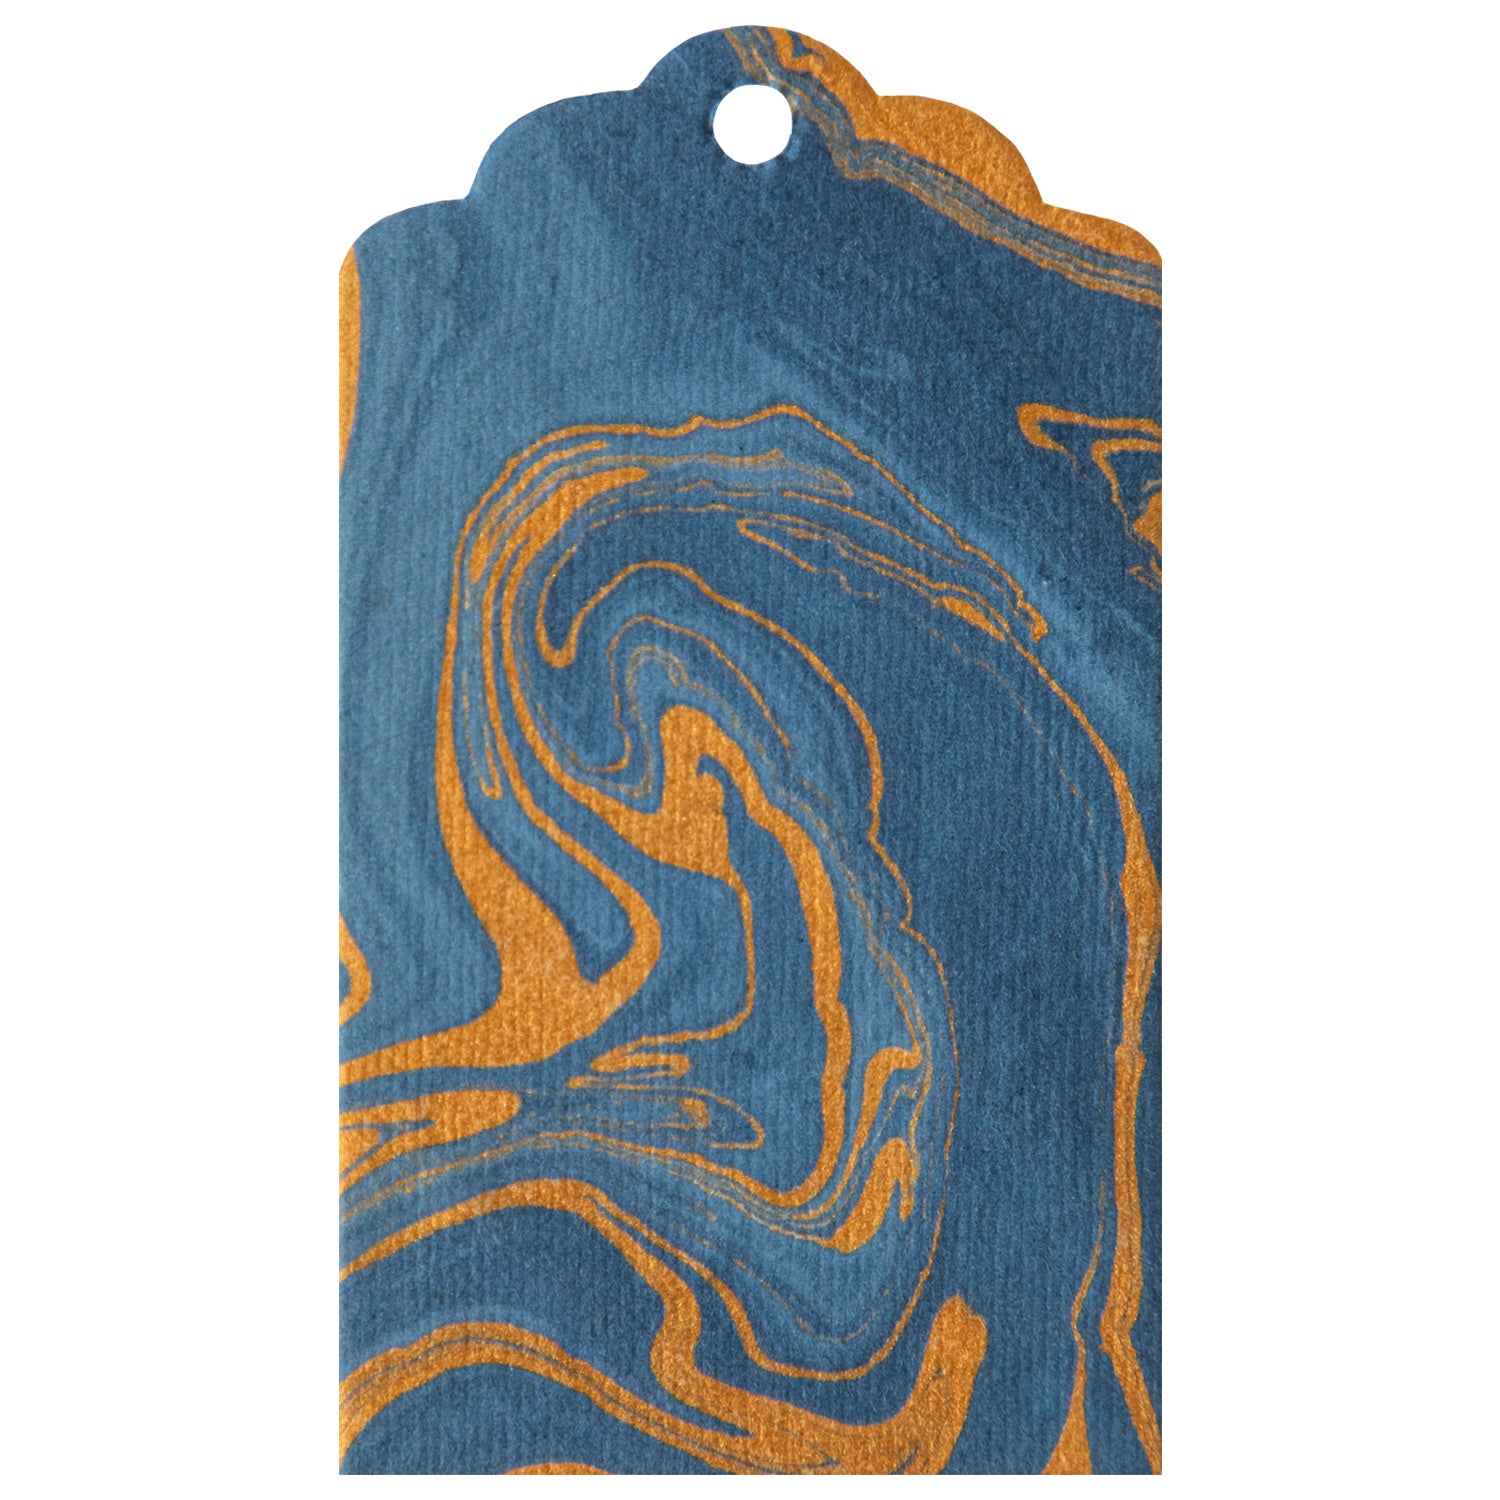 A handmade Vein Marbled Gift Tag made from unique papers by Hester &amp; Cook.